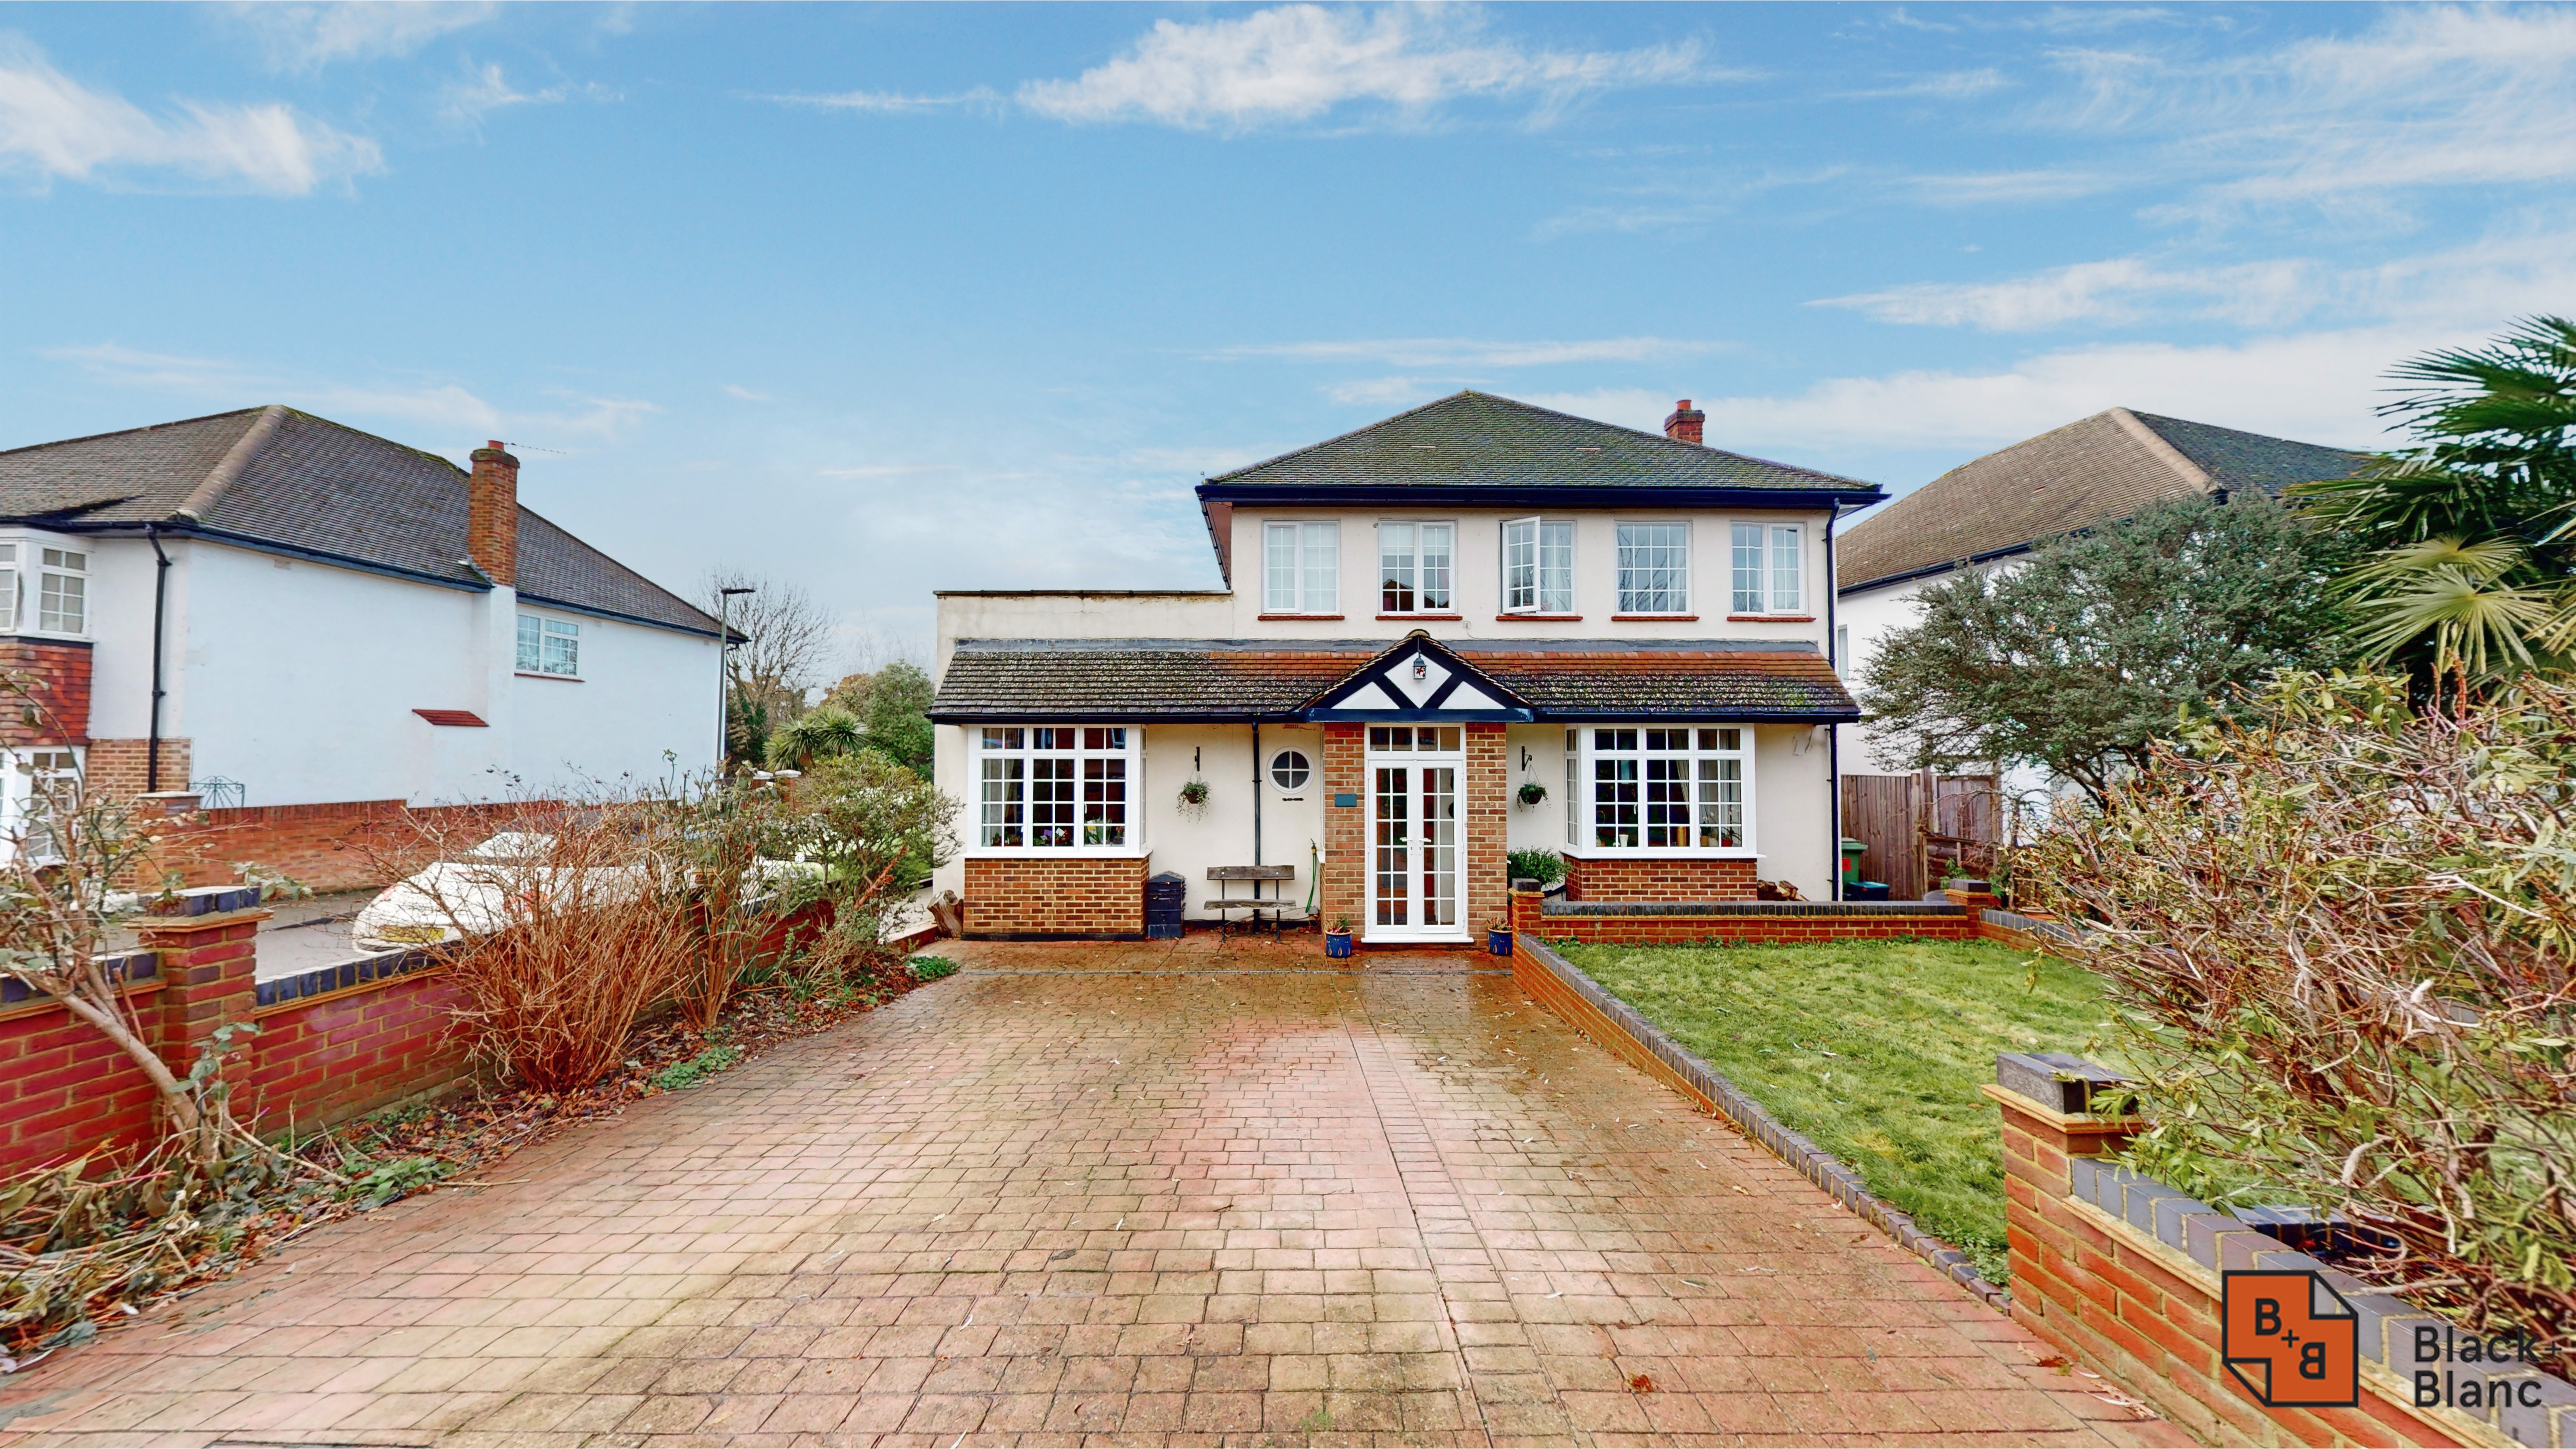 4 bed house for sale in Malmains Way, Beckenham  - Property Image 1